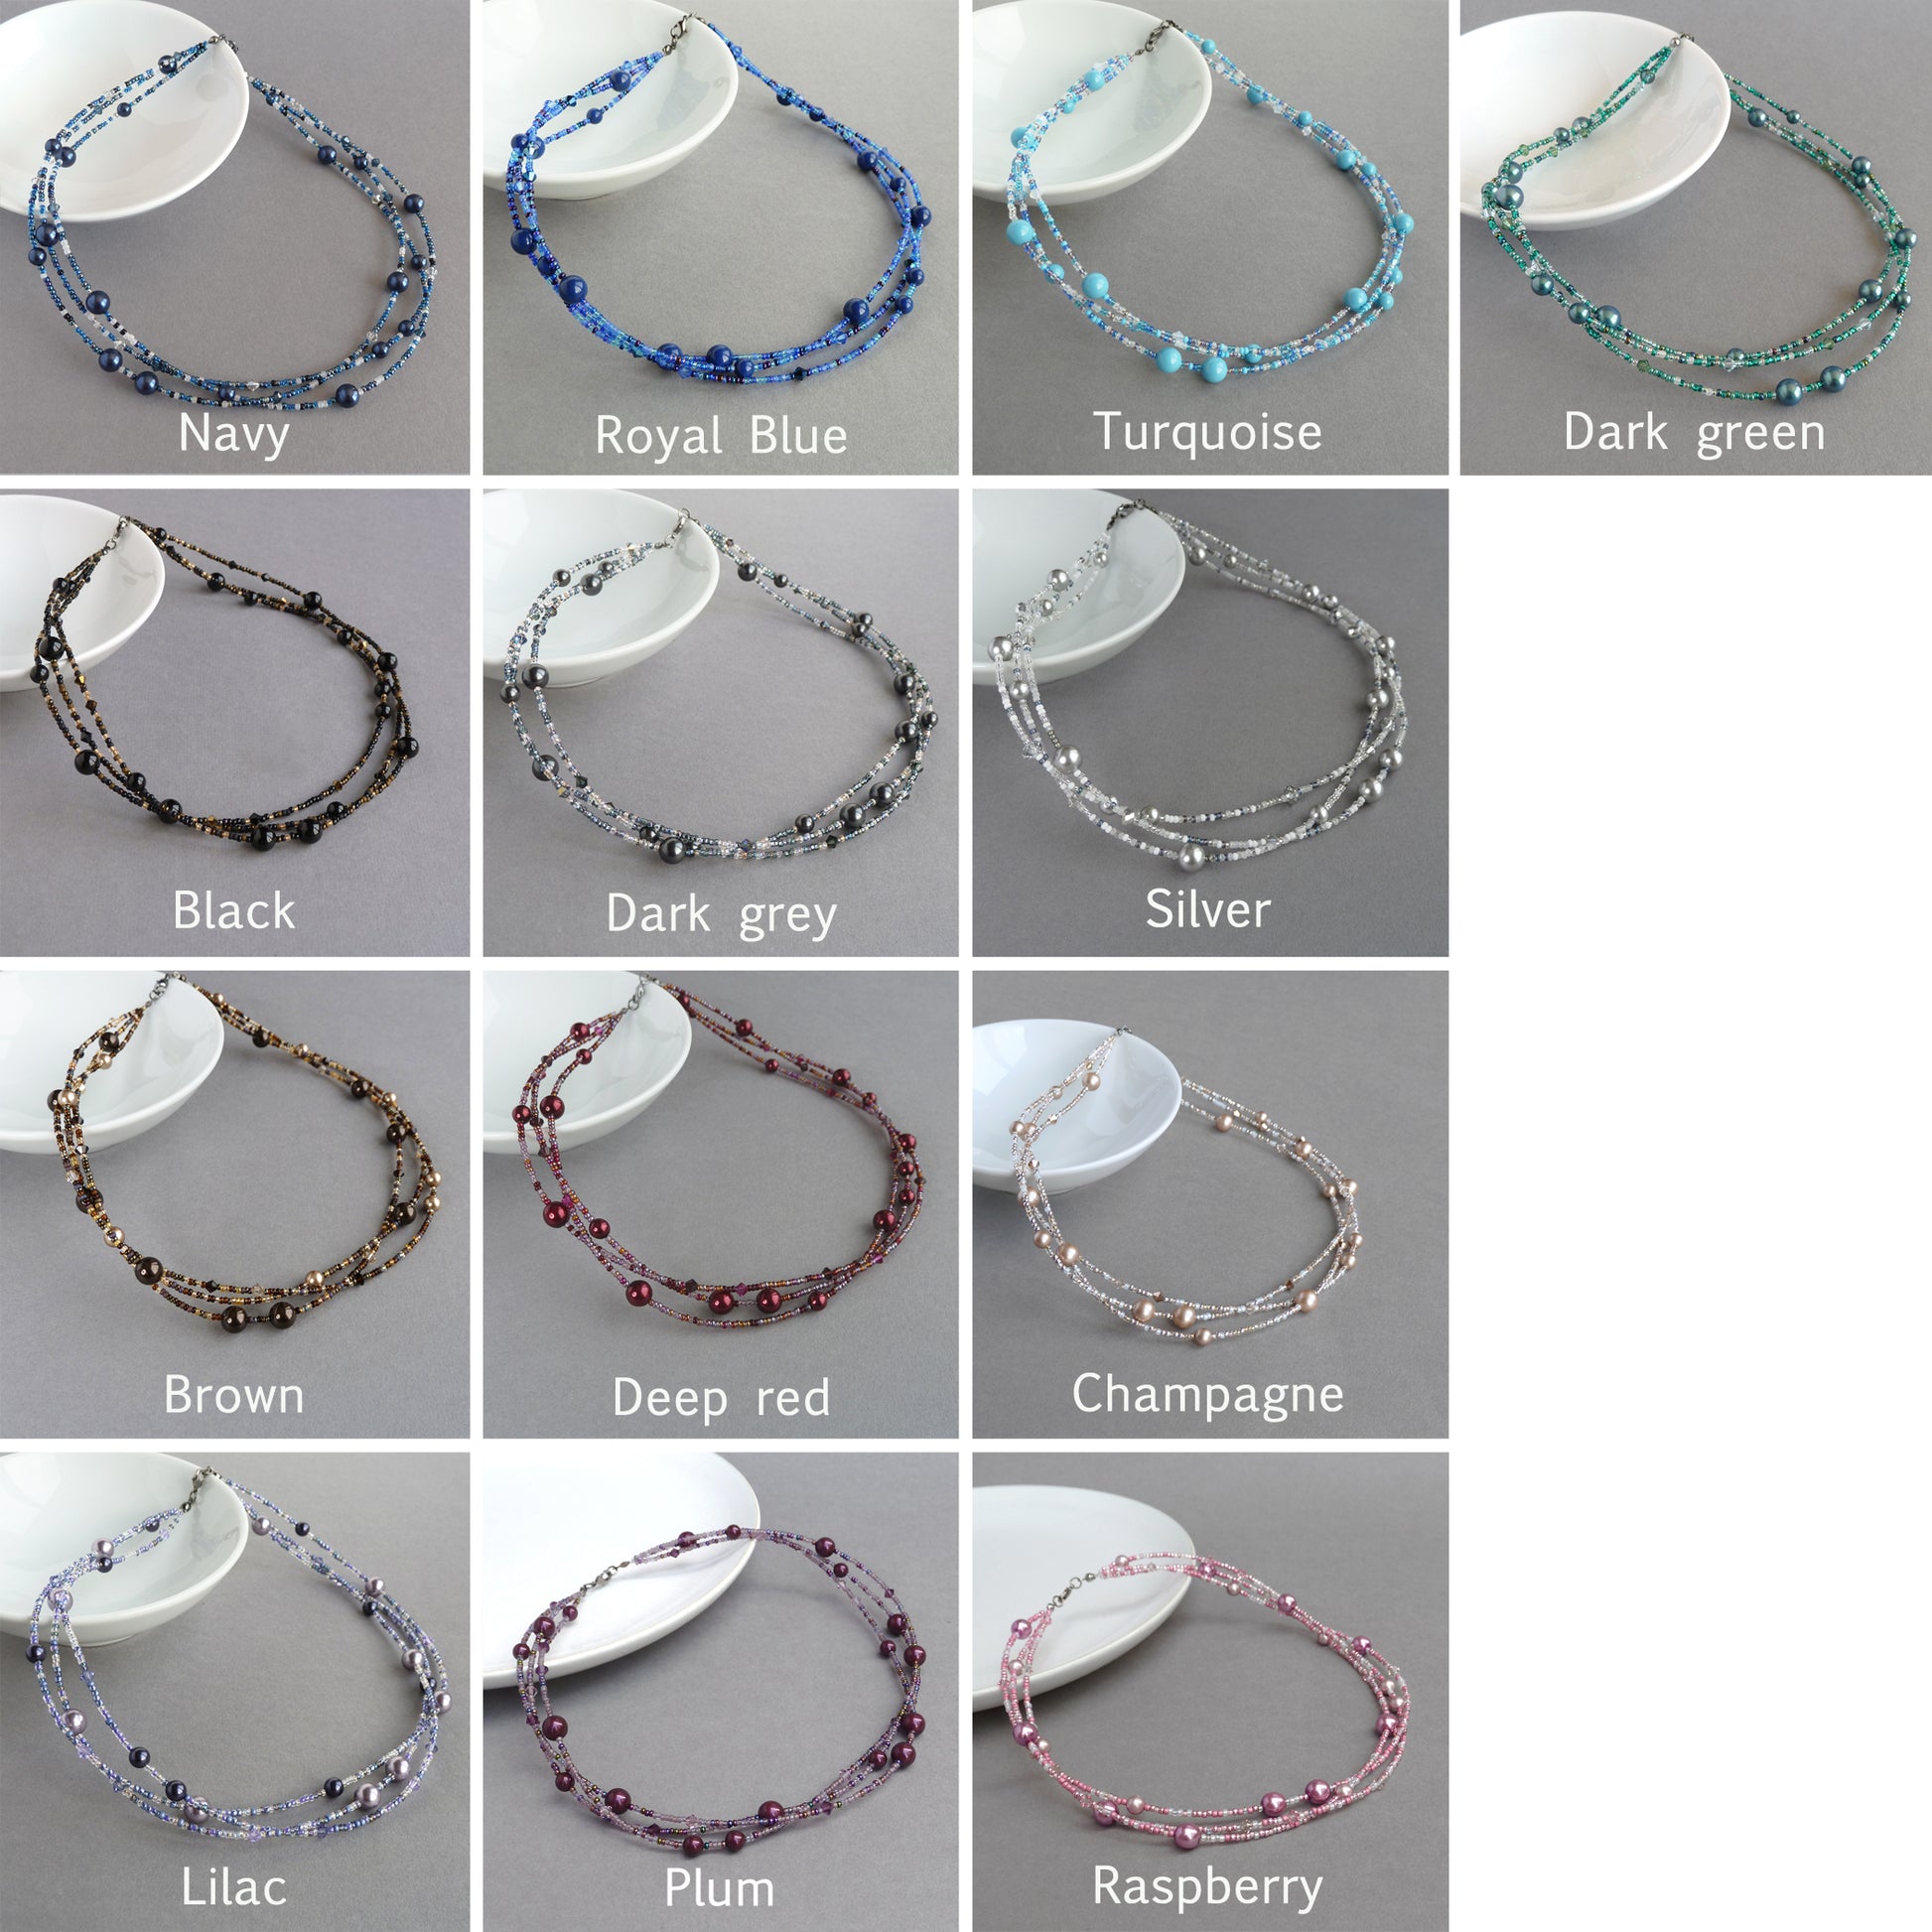 Beaded pearl necklaces by Anna King Jewellery